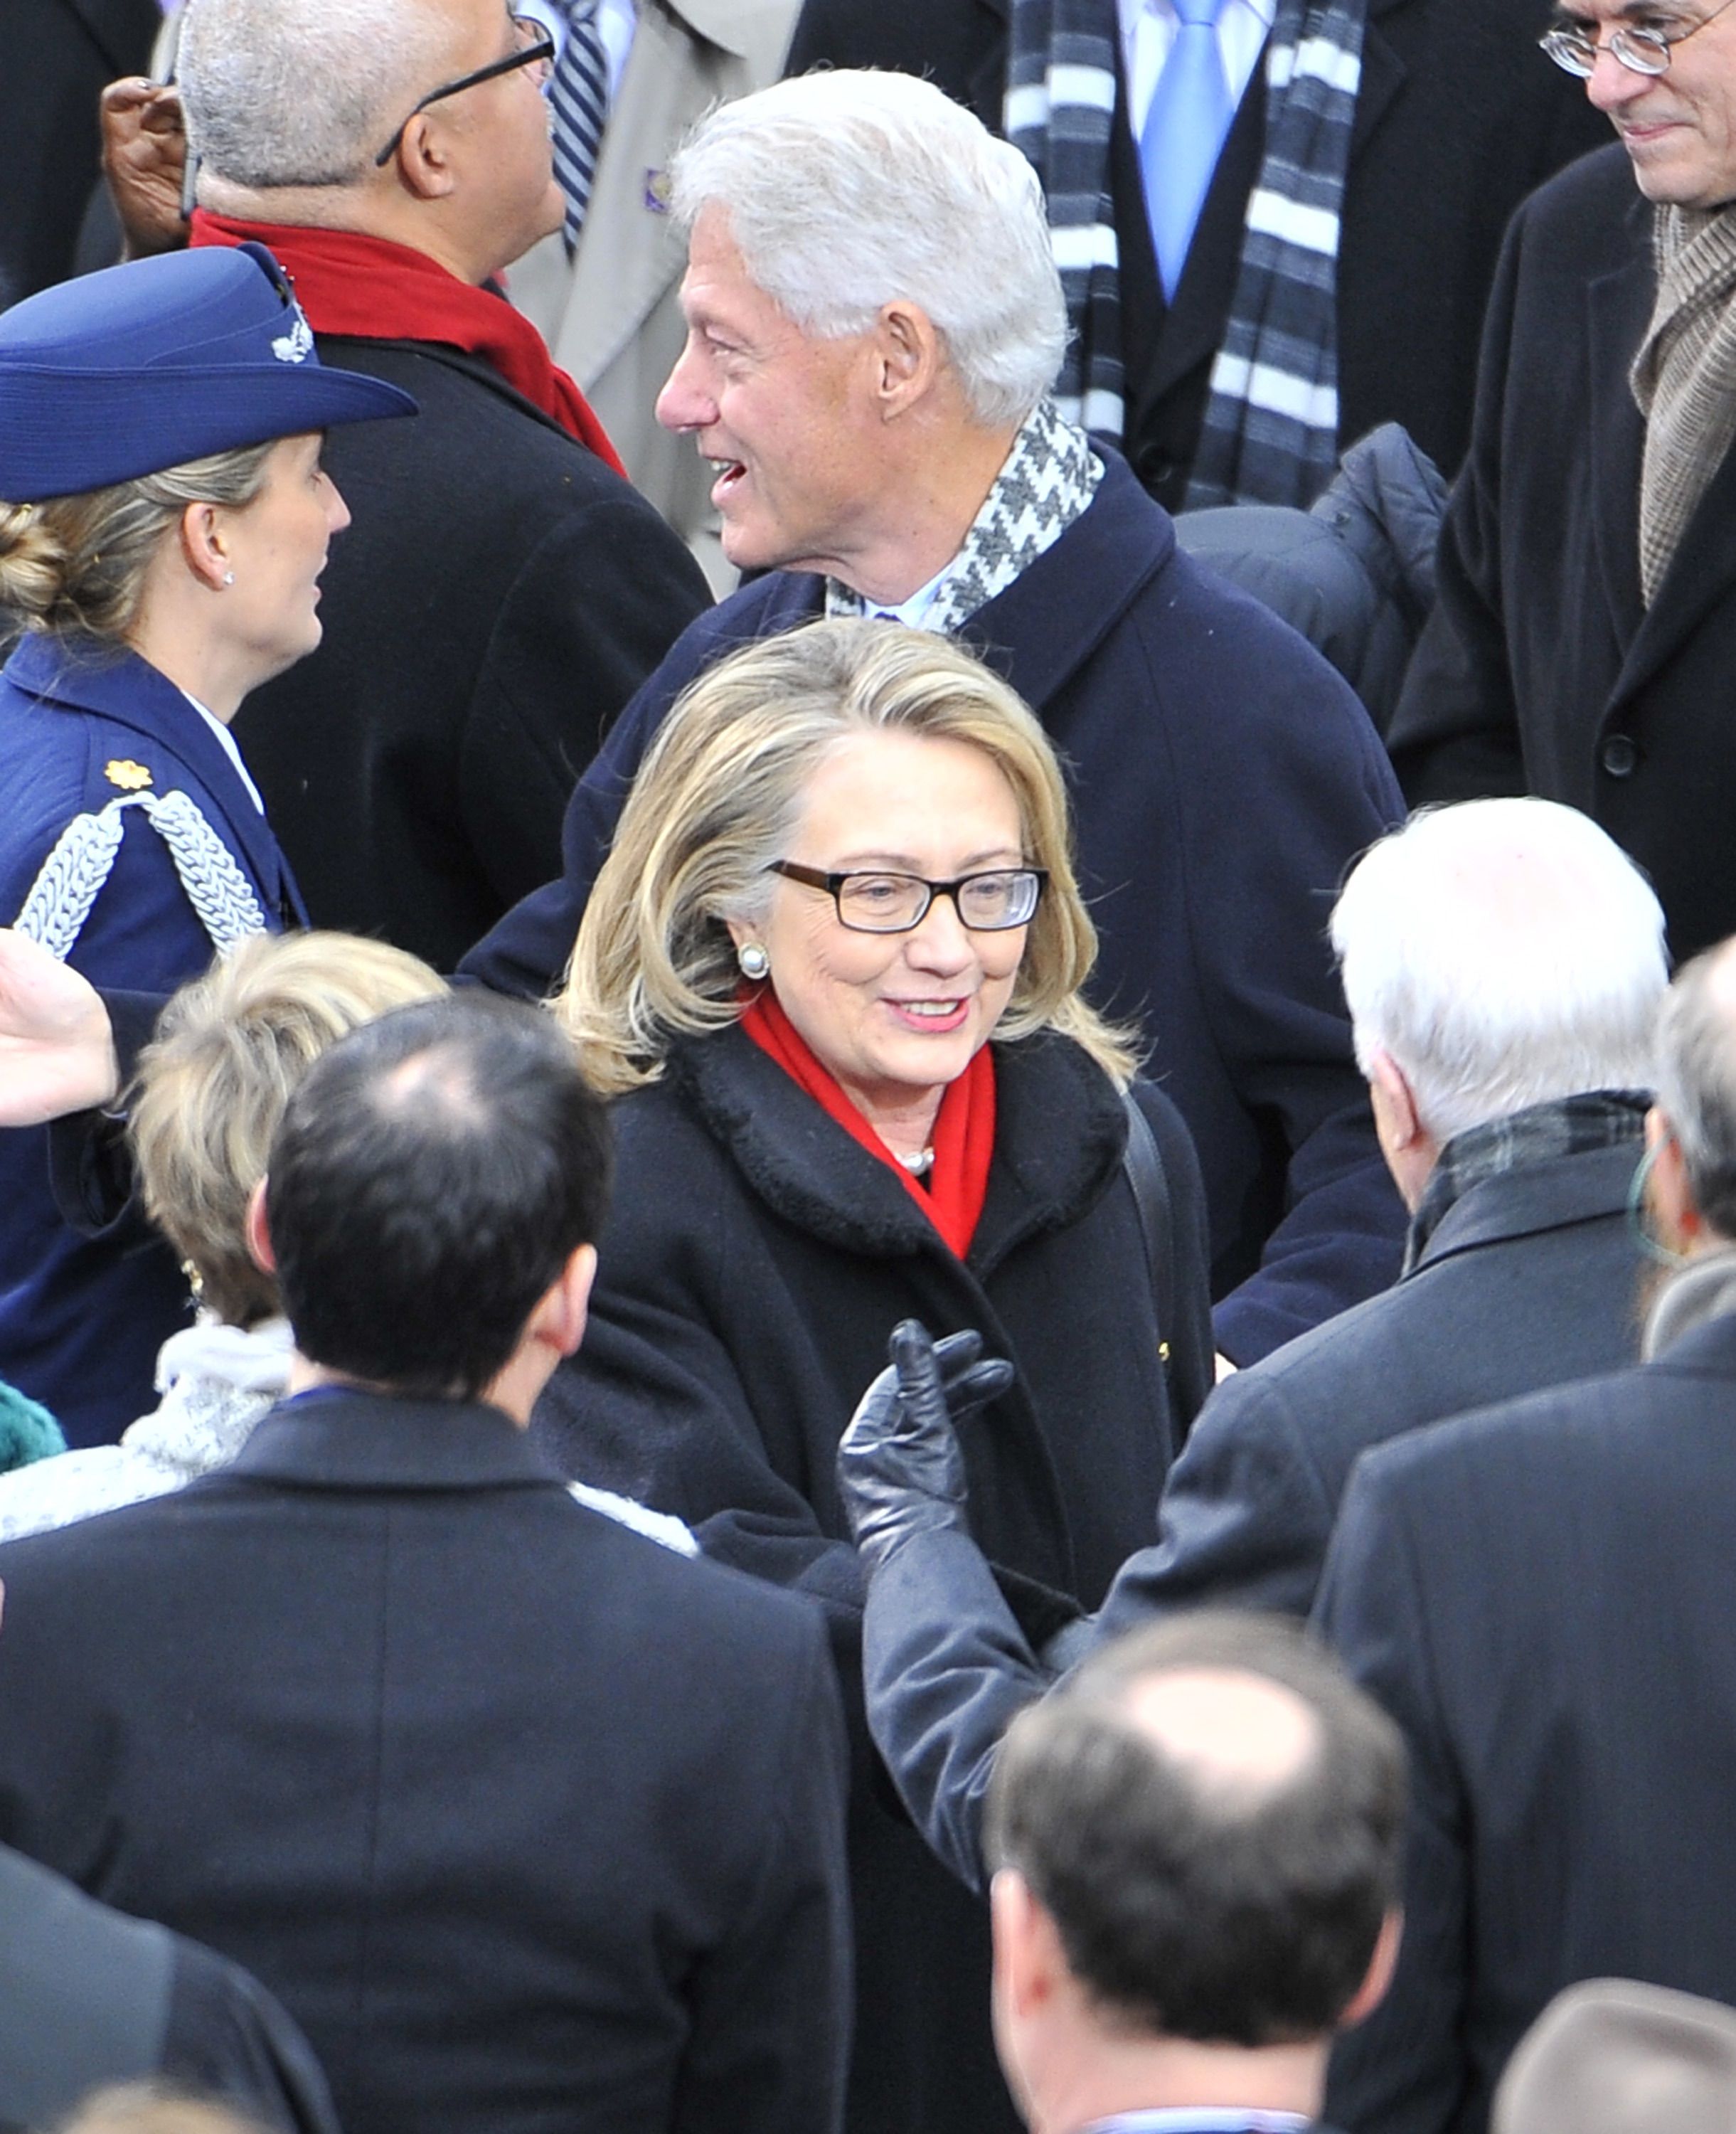 Secretary of State Hilary Clinton and former President Bill Clinton arrive for the inauguration on the West Front of the U.S. Capitol on Monday, January 21, 2013 in Washington, D.C. (Mark Gail/MCT)